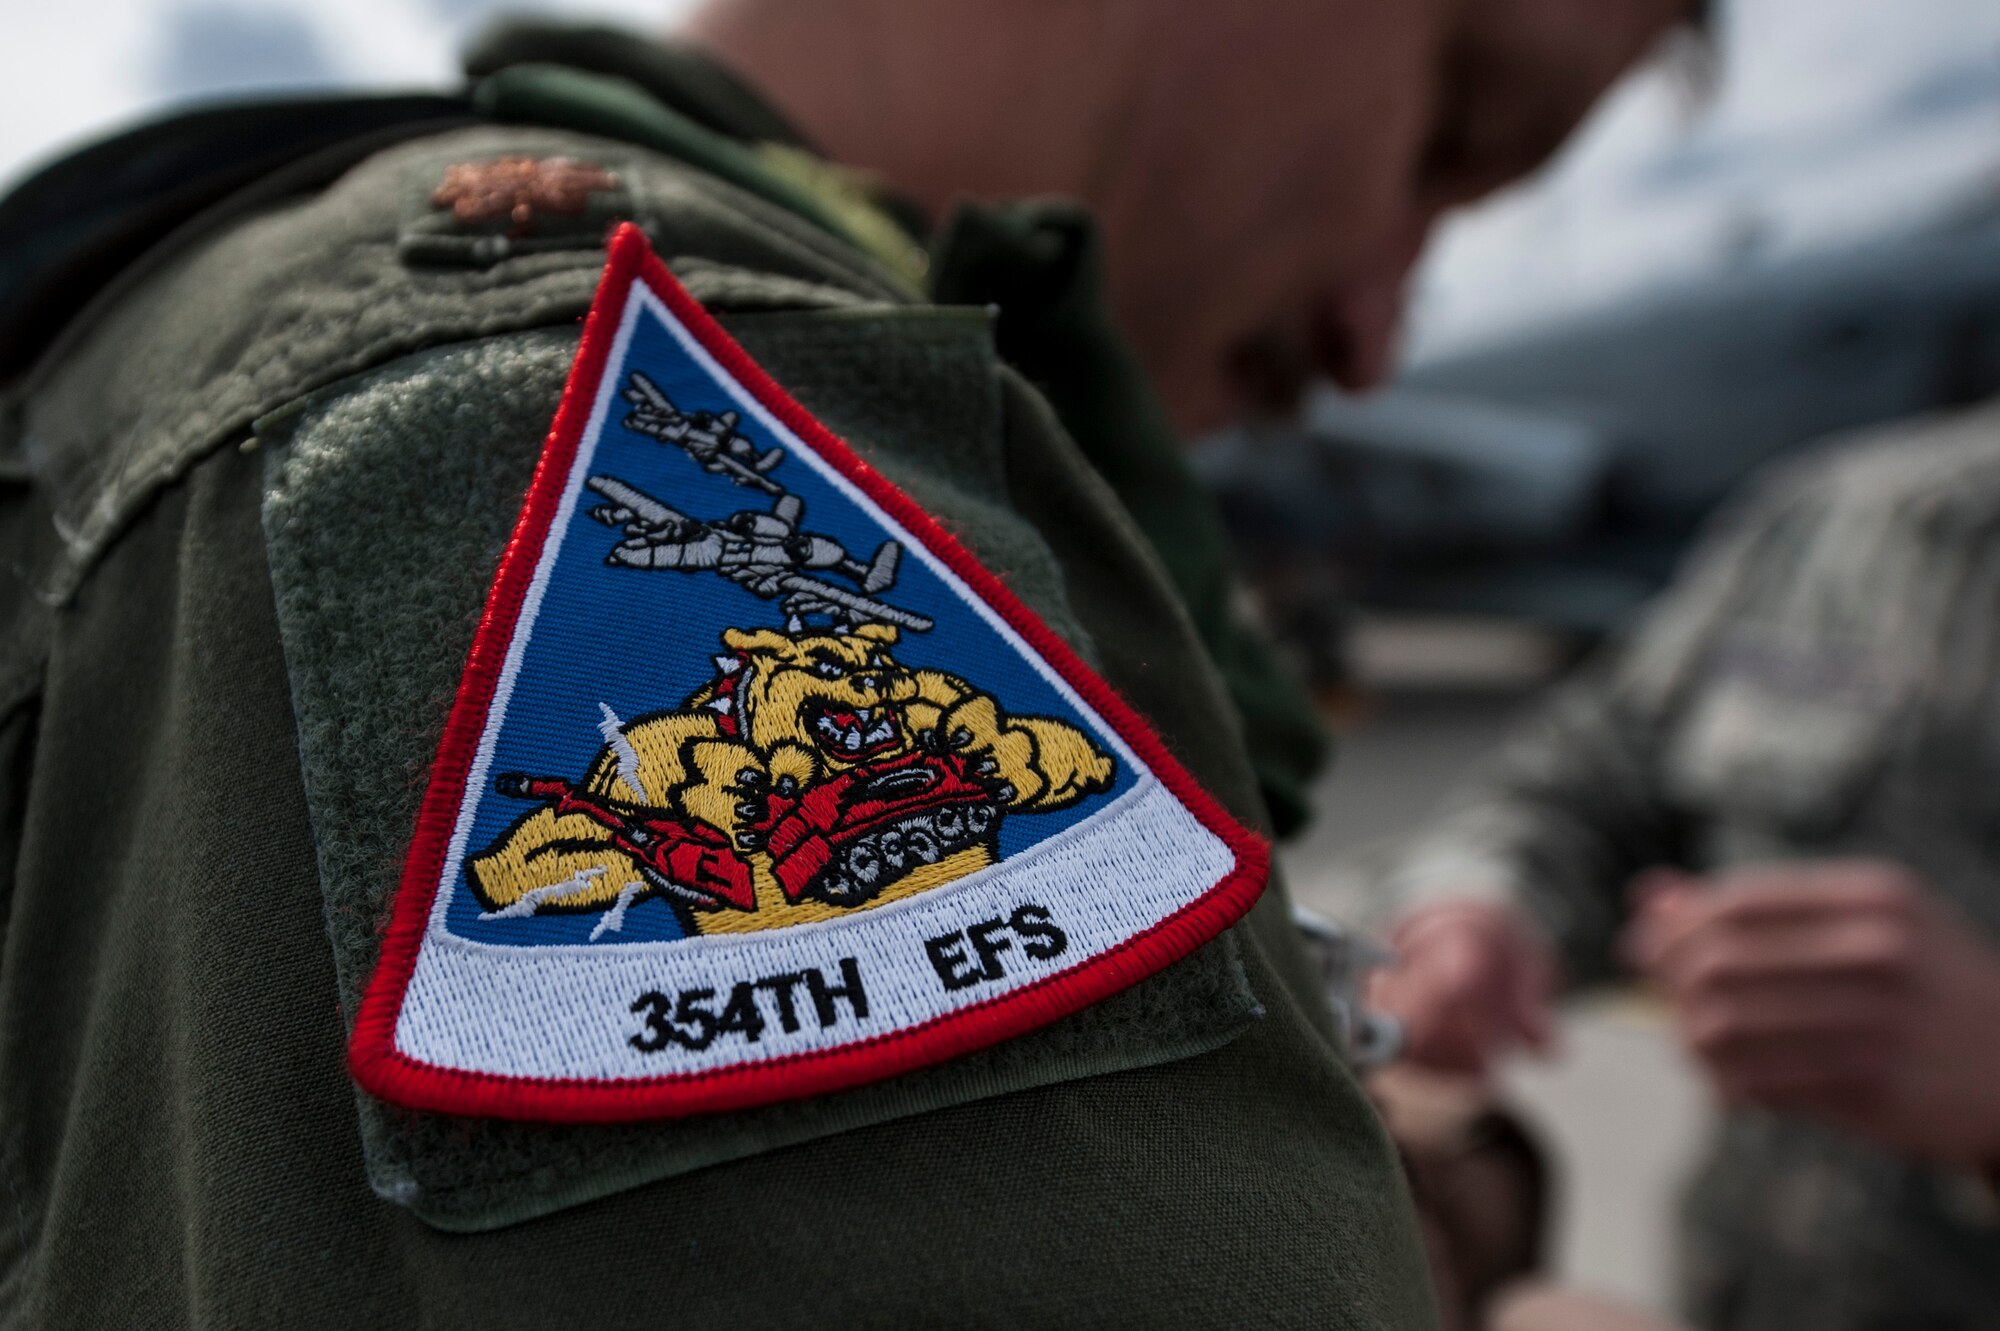 A 354th Expeditionary Fighter Squadron patch is displayed on the shoulder of an A-10 Thunderbolt II attack aircraft pilot May 1, 2015, at Ämari Air Base, Estonia. Nearly 70 Airmen and support equipment from the 355th Fighter Wing at Davis-Monthan Air Force Base, Arizona, and the 52nd Fighter Wing at Spangdahlem Air Base, Germany, are here to support operations in Estonia as part of the first European Theater Security Package rotation. (U.S. Air Force photo by Senior Airman Rusty Frank/Released)